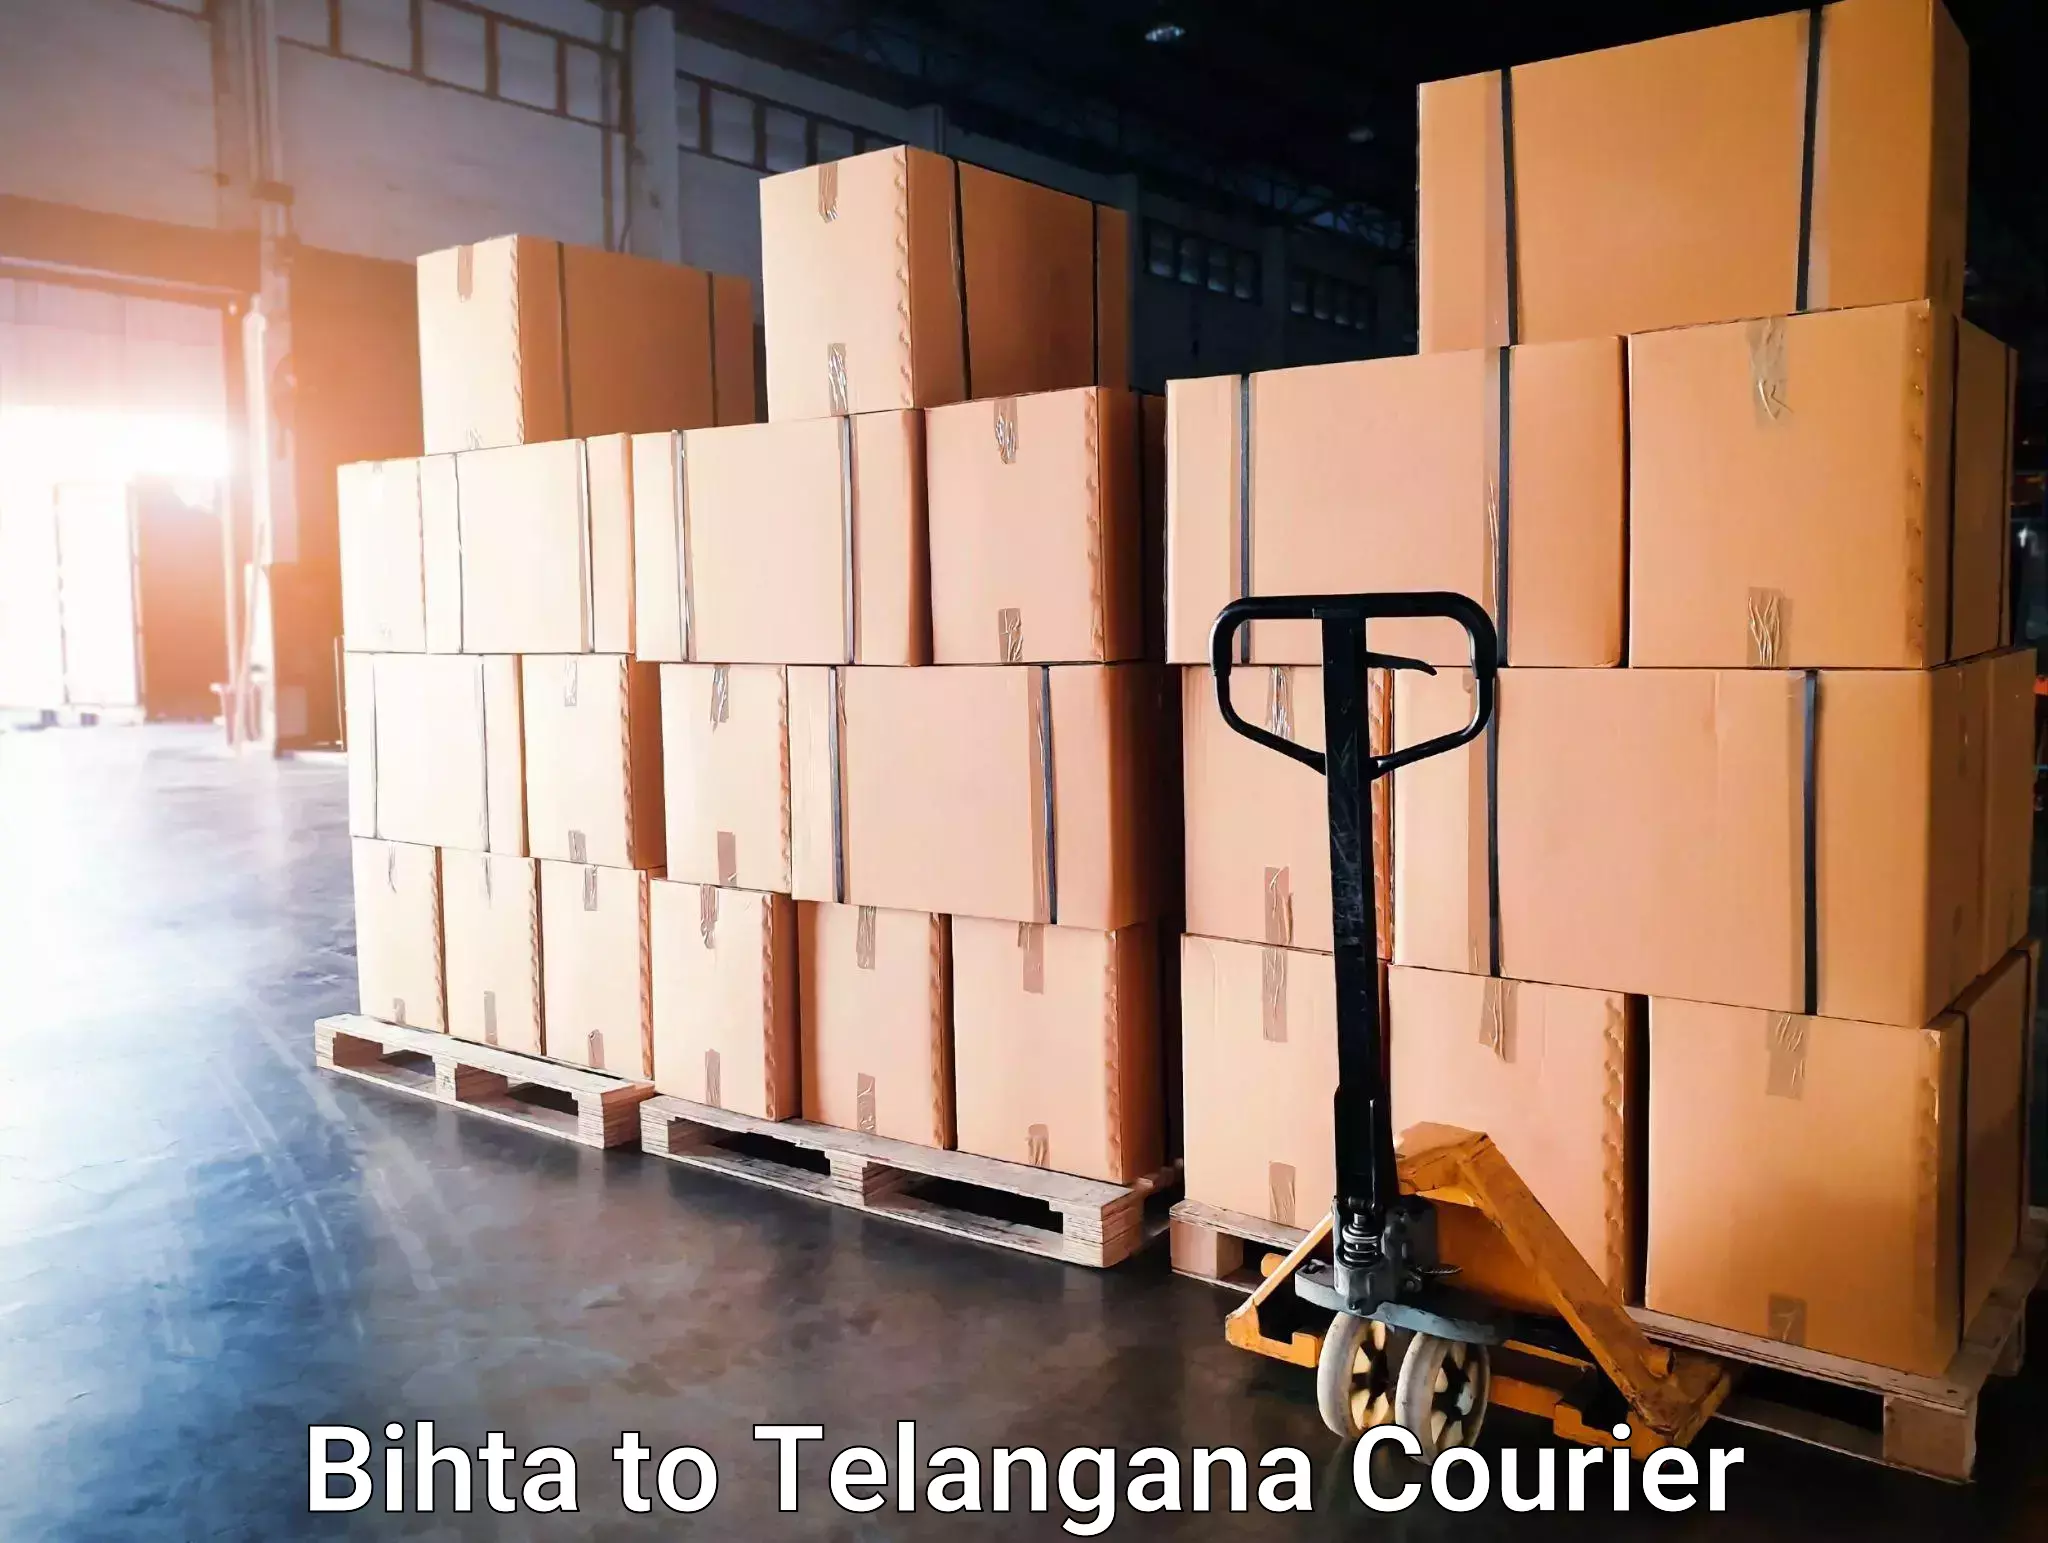 Hassle-free relocation in Bihta to Shamshabad